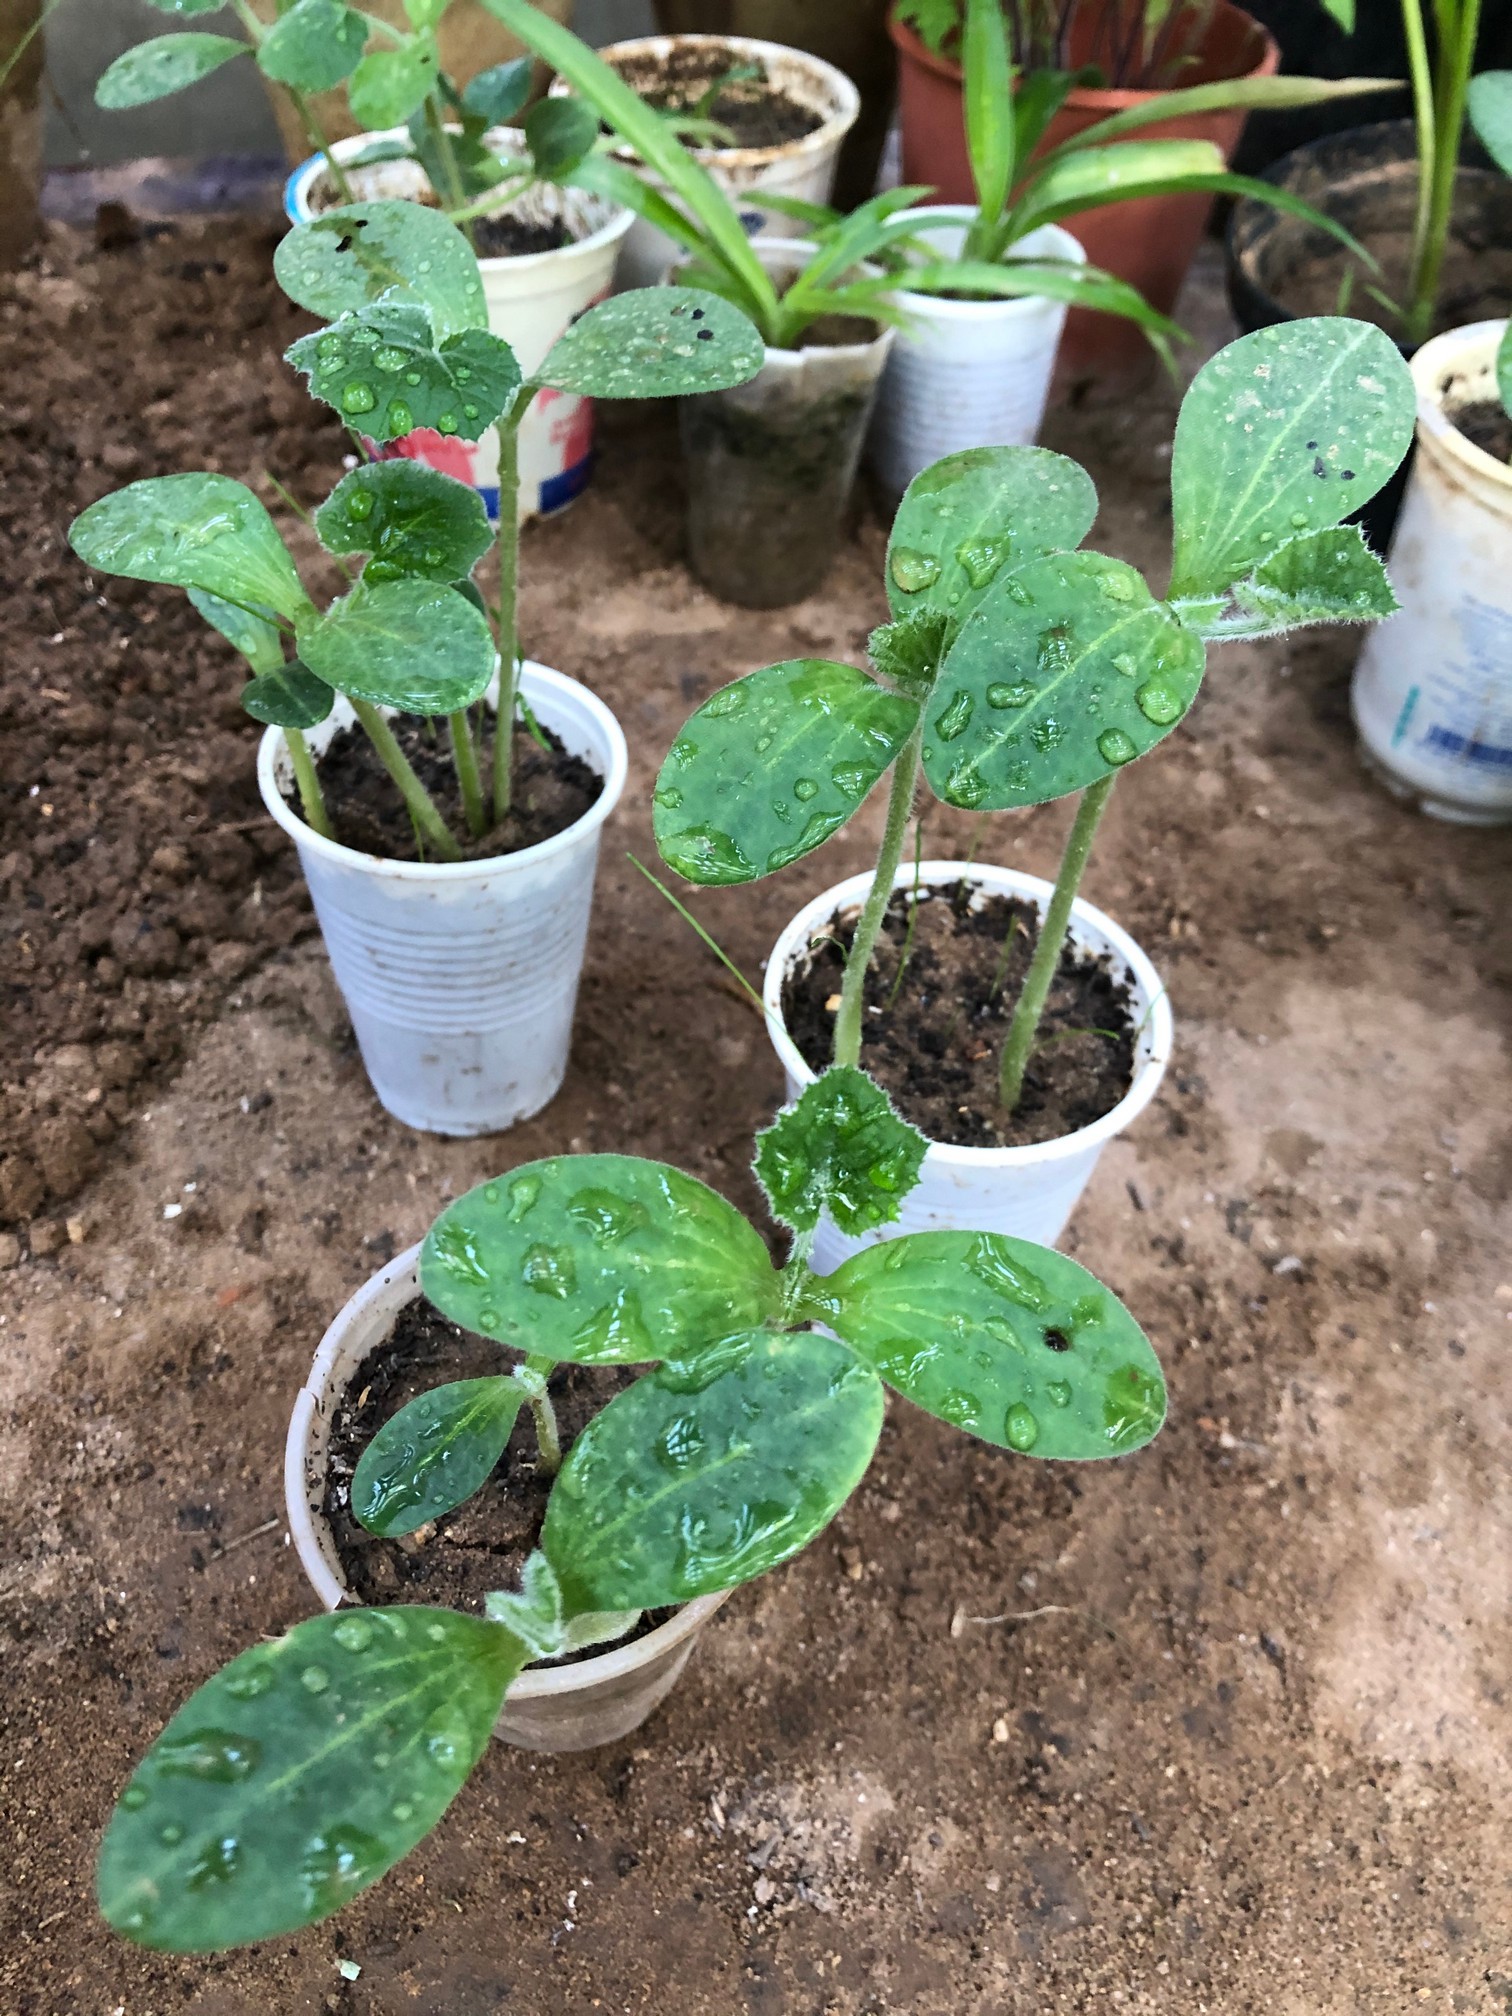 Thinning zucchini seedlings allows the remaining plants to access essential resources such as sunlight, water, and nutrients without competition. This process reduces overcrowding, enhances airflow, and minimizes the risk of disease, ultimately contributing to stronger, more productive plants.